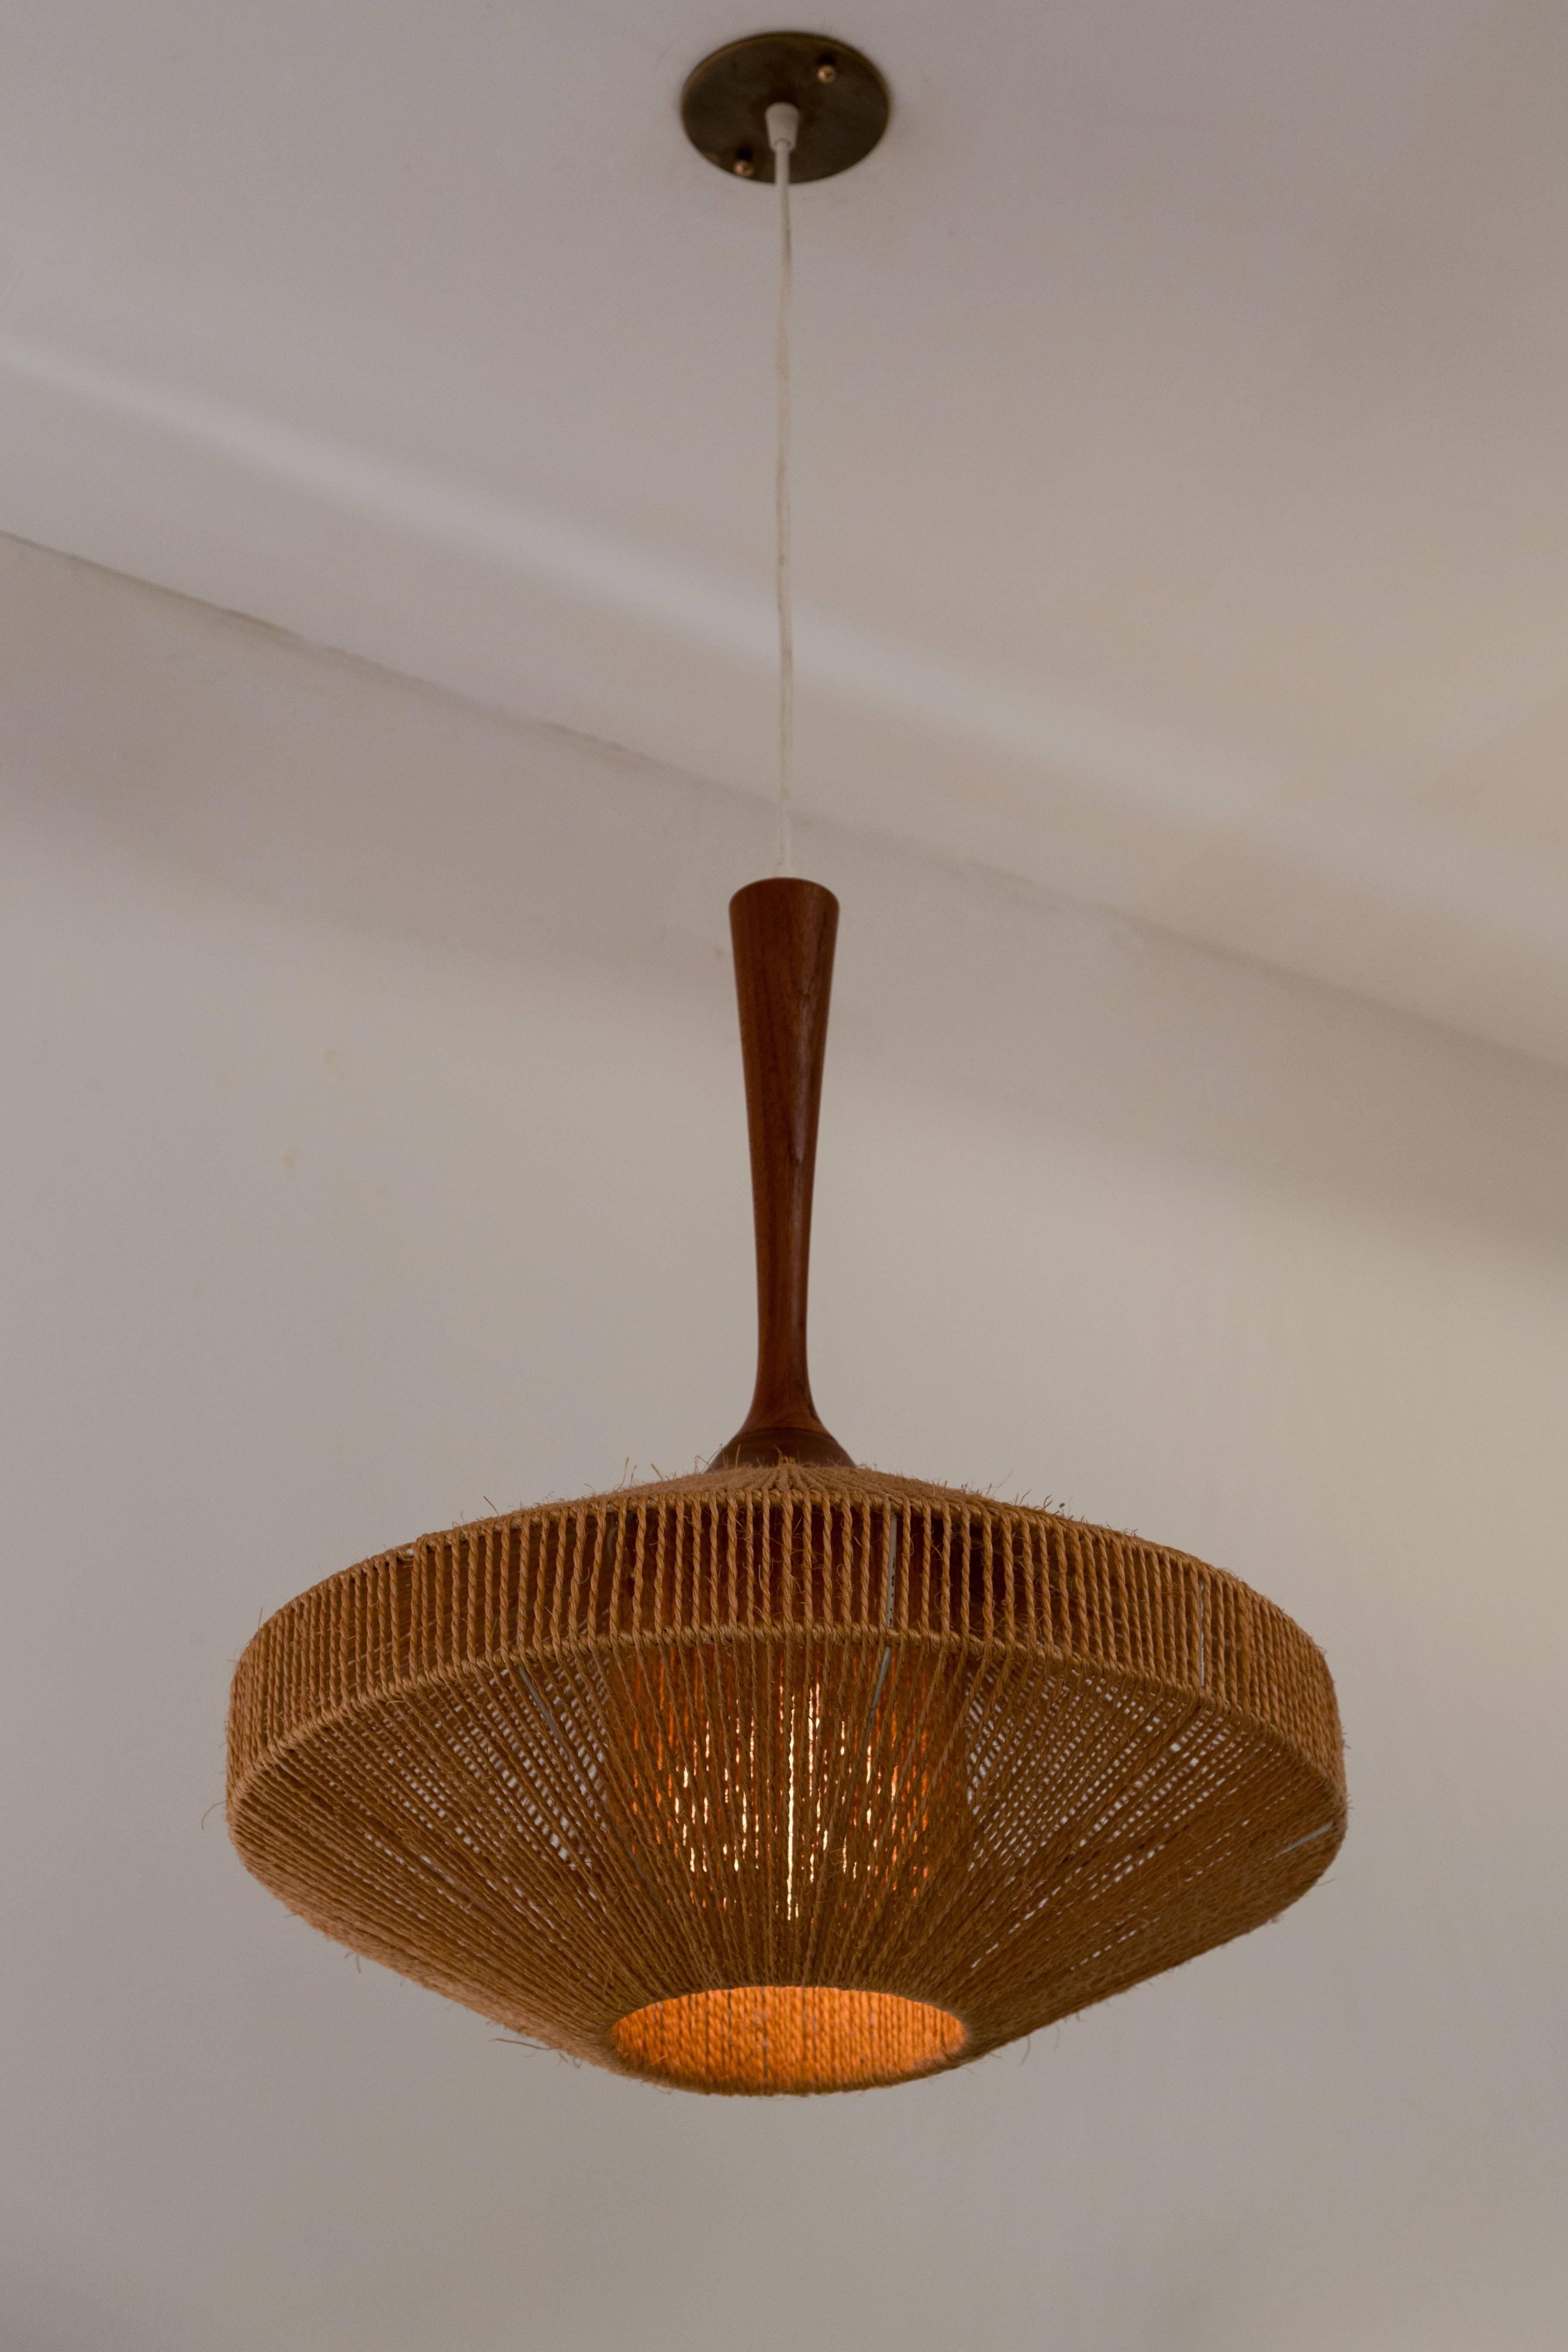 Teak stem with a woven jute wrapped shade. Overall drop can be customized. E26 75w maximum bulb.